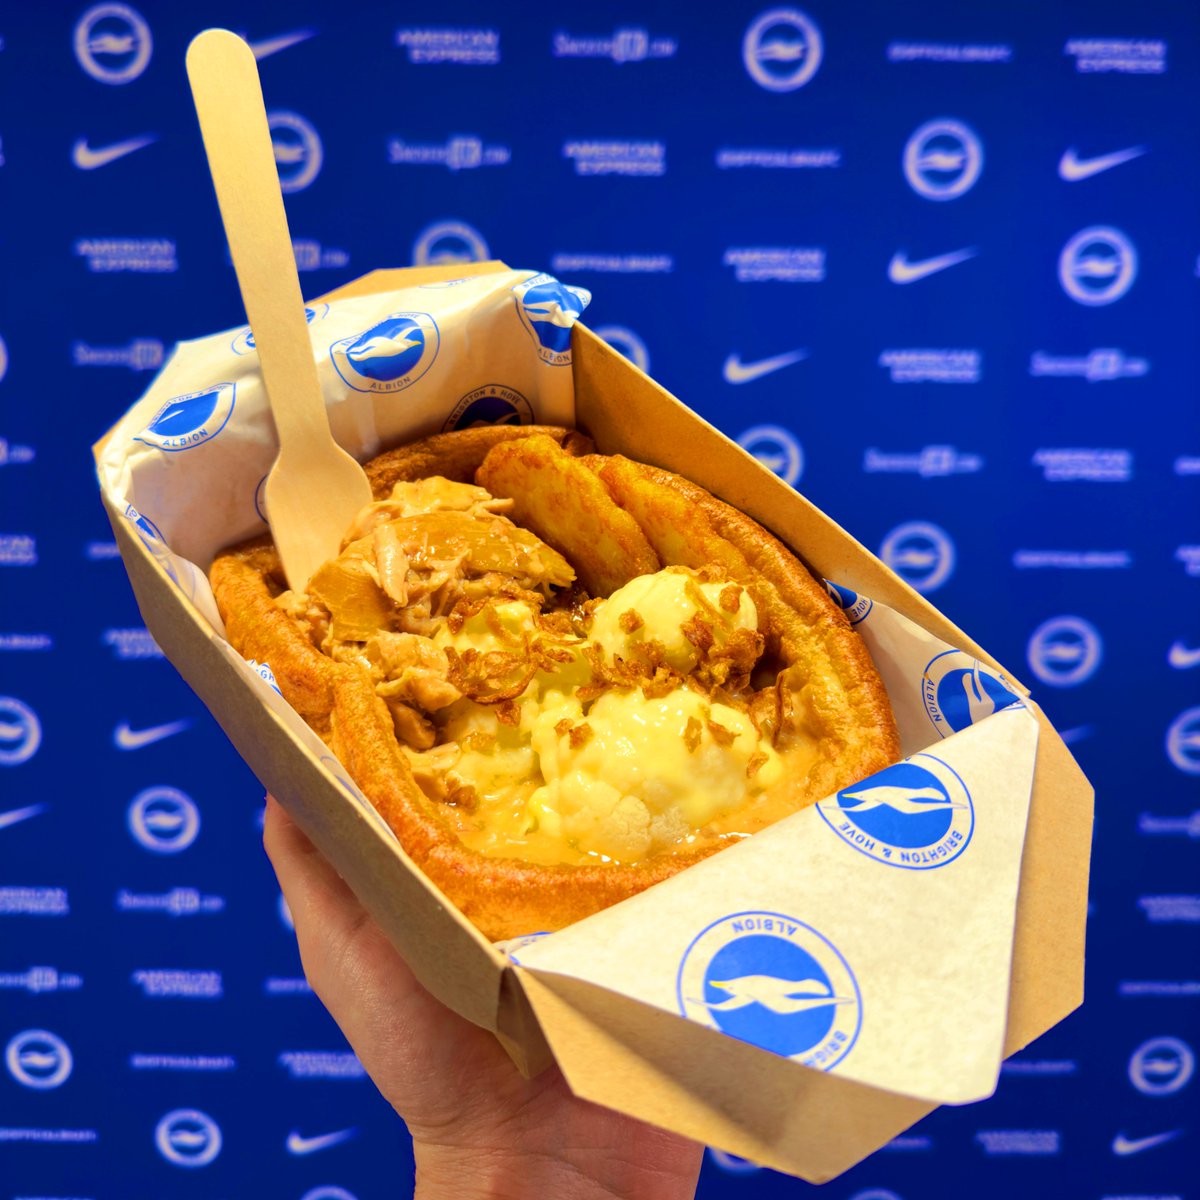 Time to start thinking about lunch? 🙄 We've got a Sunday special for @OfficialBHAFC fans heading to today's match. Enjoy our 'Sunday lunch in a Yorkshire pudding' for £8.50. Available in selected kiosks across all concourses. 🥔 #BHAFC | @FootyScran 😁